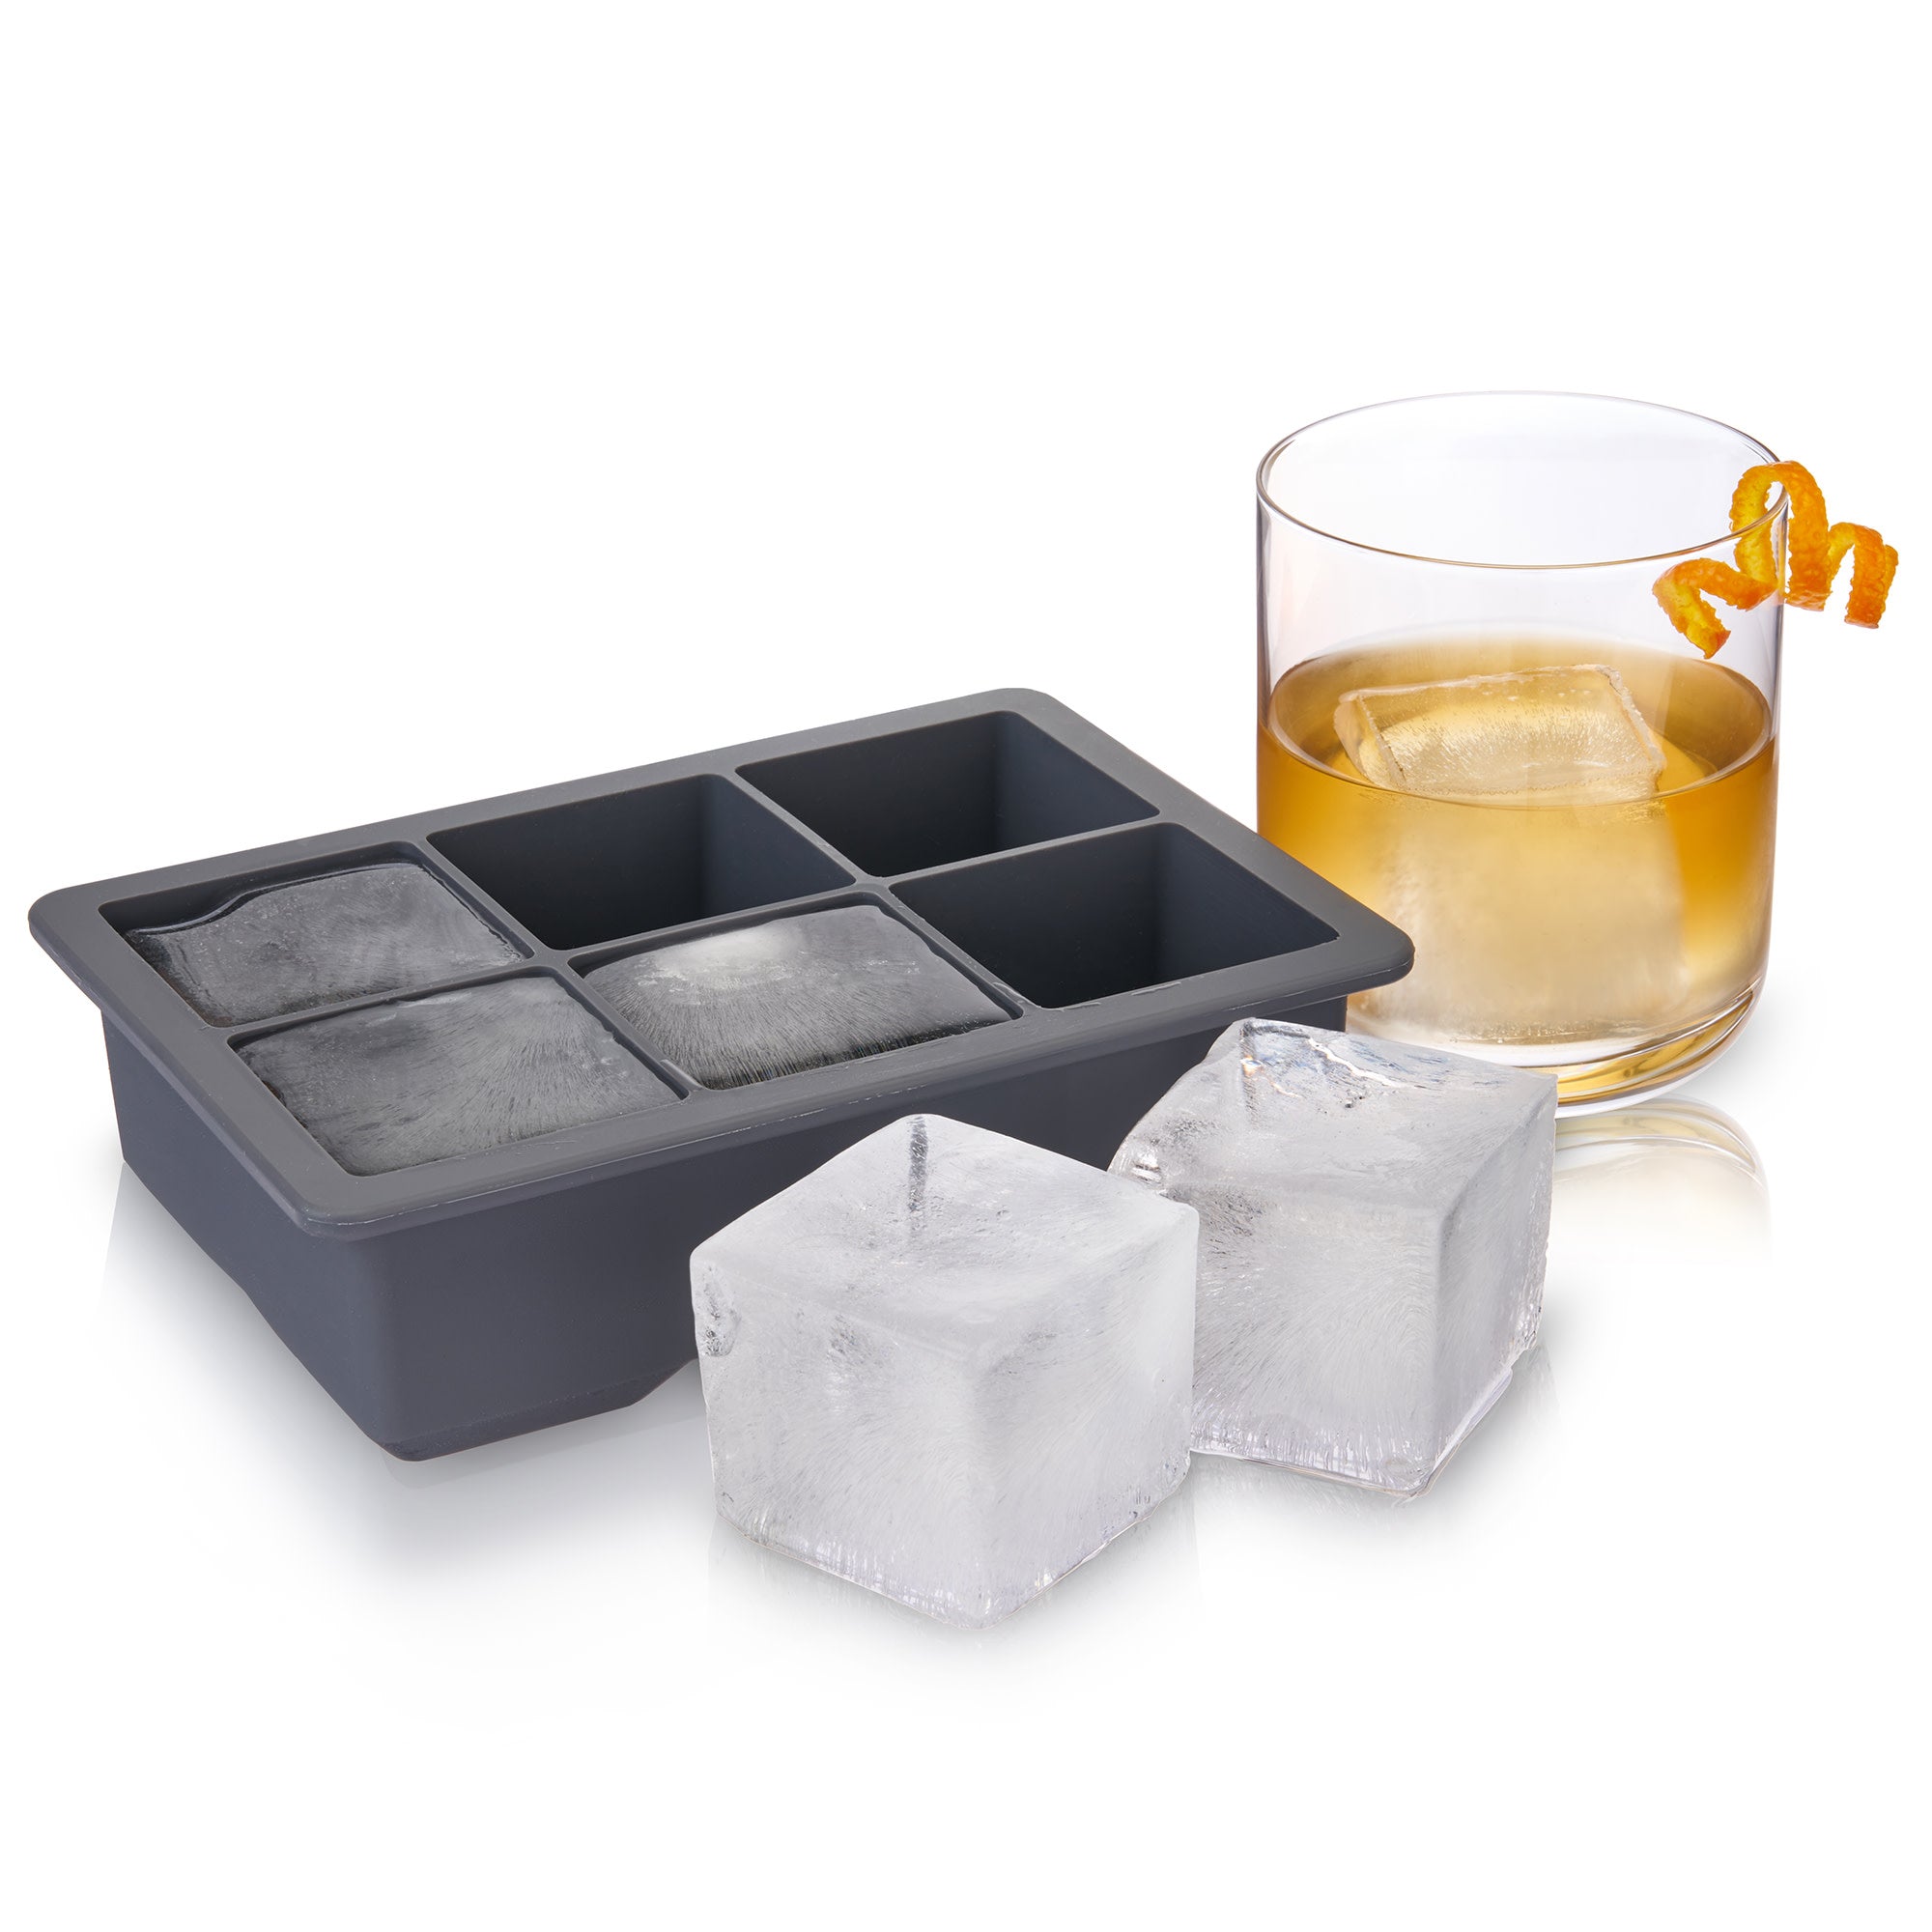 Ice tray .Reusable.Ice Cube Trays for Cocktails,Whisky,Freezer.